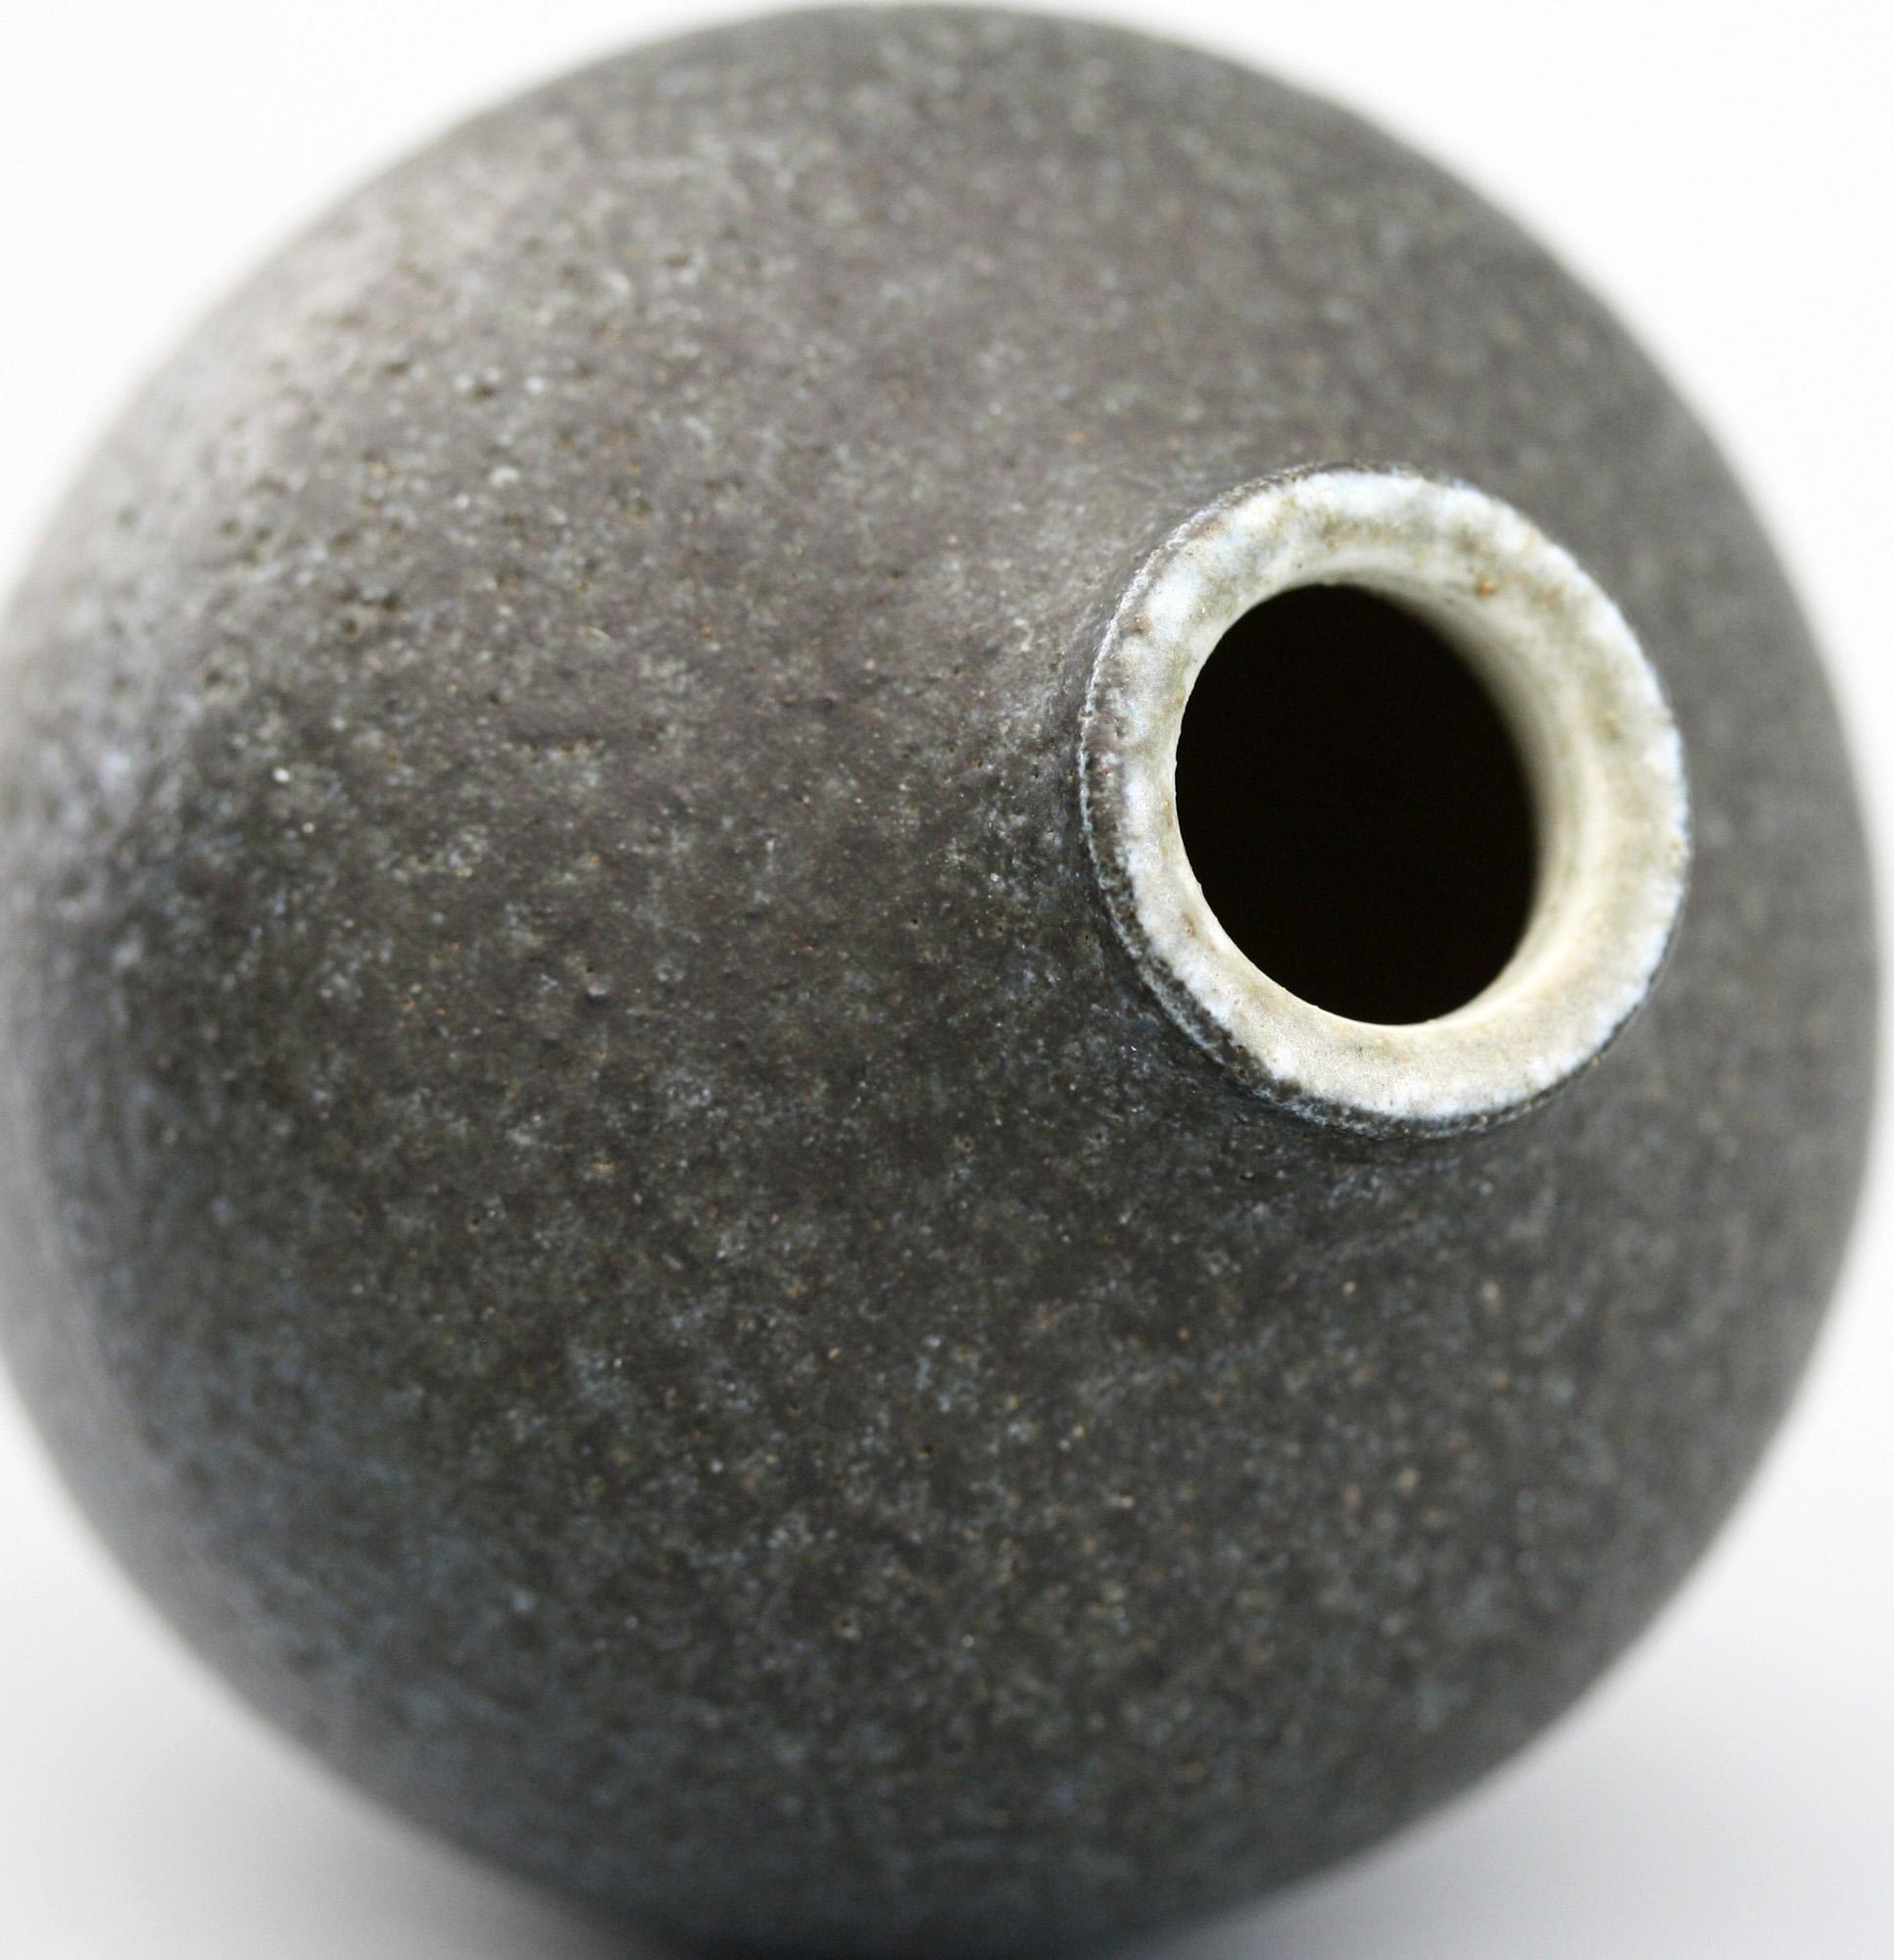 A rare and exceptional Martin Brothers stoneware art pottery rounded shaped vase decorated in textured matte black glazes by Walter Martin and dated 1901. The small rounded heavy stoneware vase is beautifully made stands on a narrow rounded base